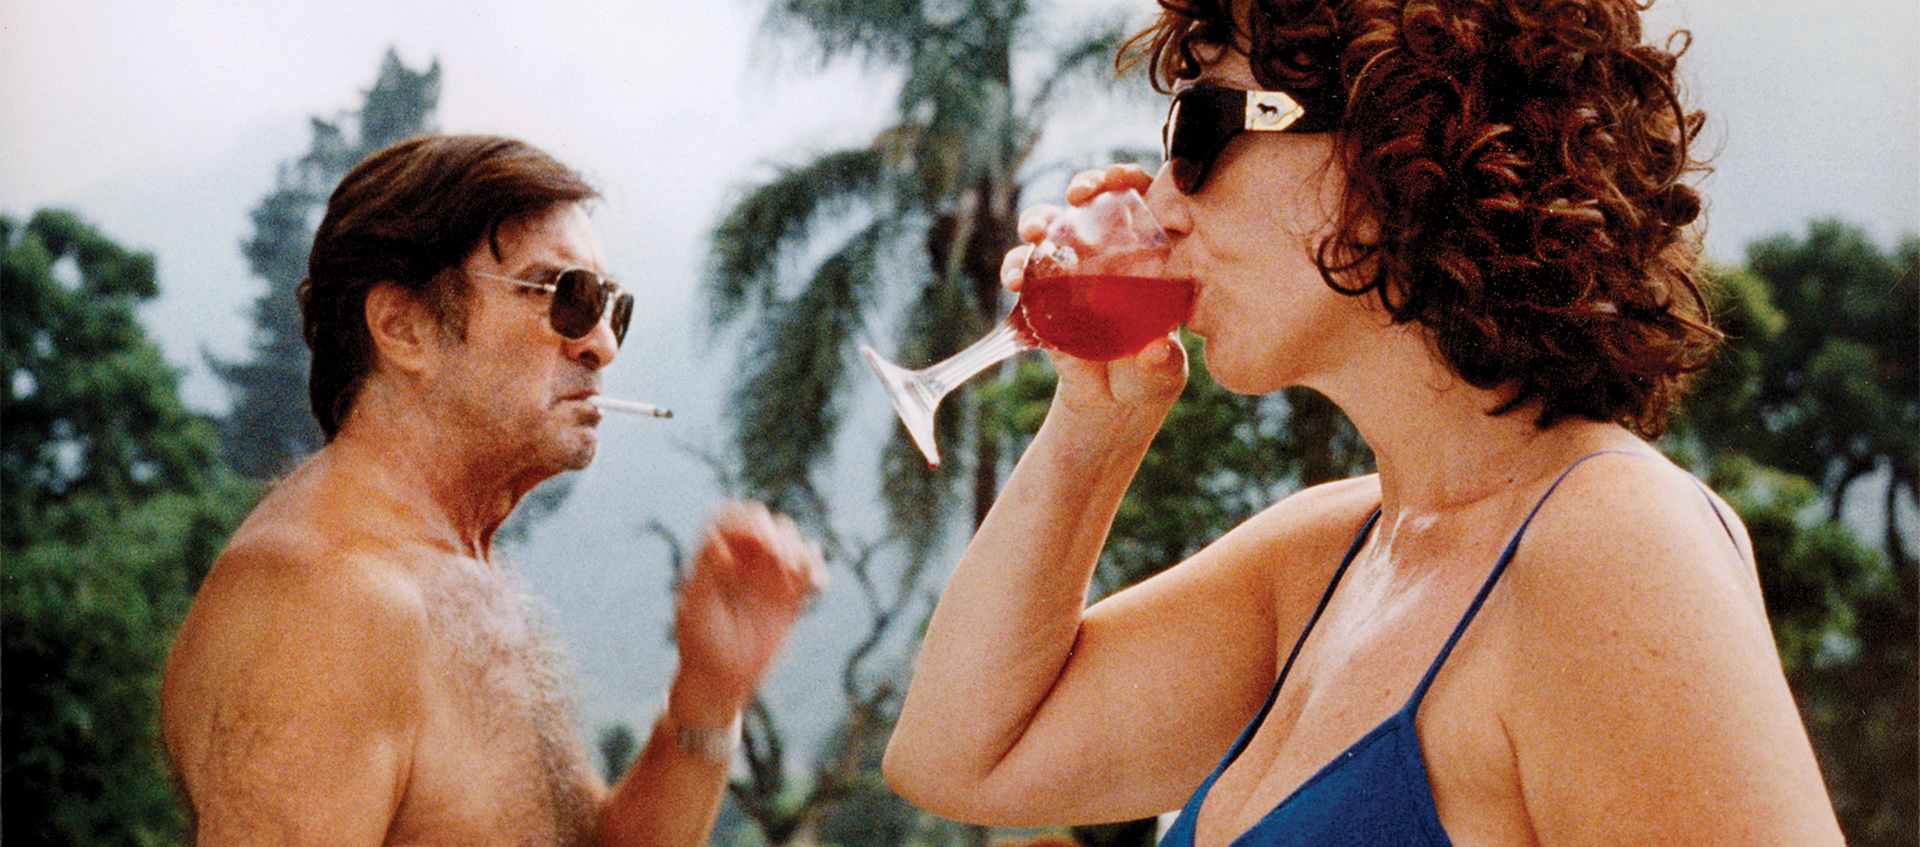 a woman drinking a red drink, a shirtless man with a cigaratte in his mouth